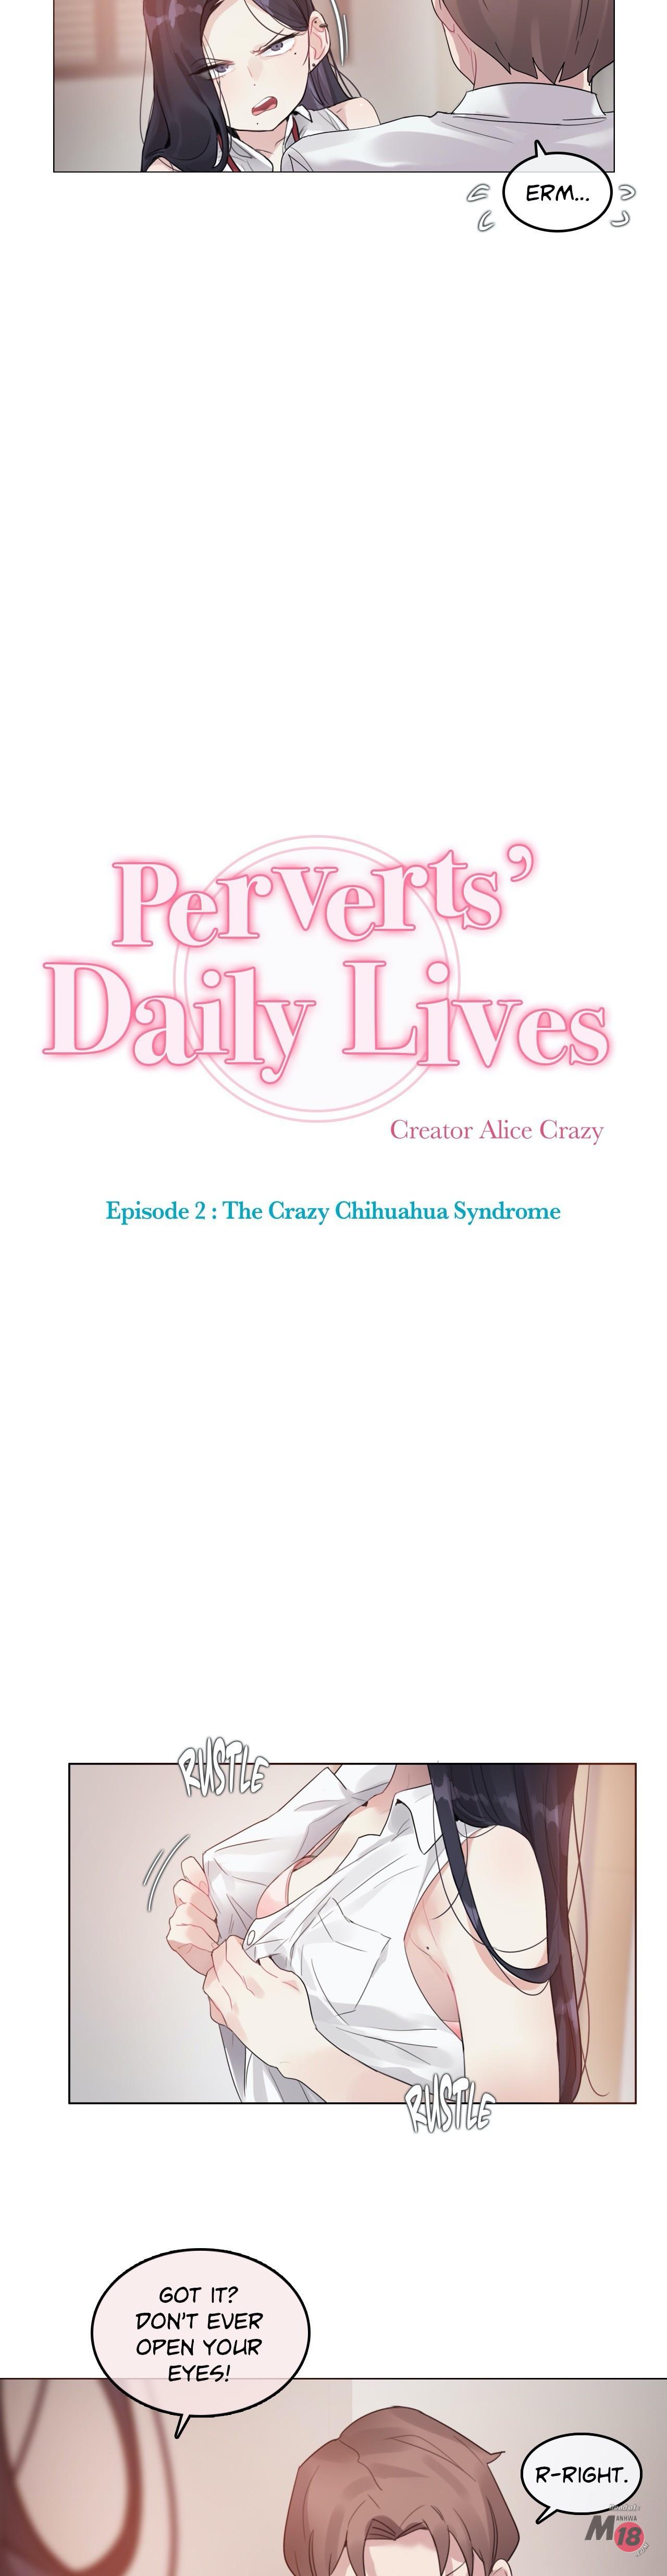 Perverts' Daily Lives Episode 2: Crazy Chihuahua Syndrome 125